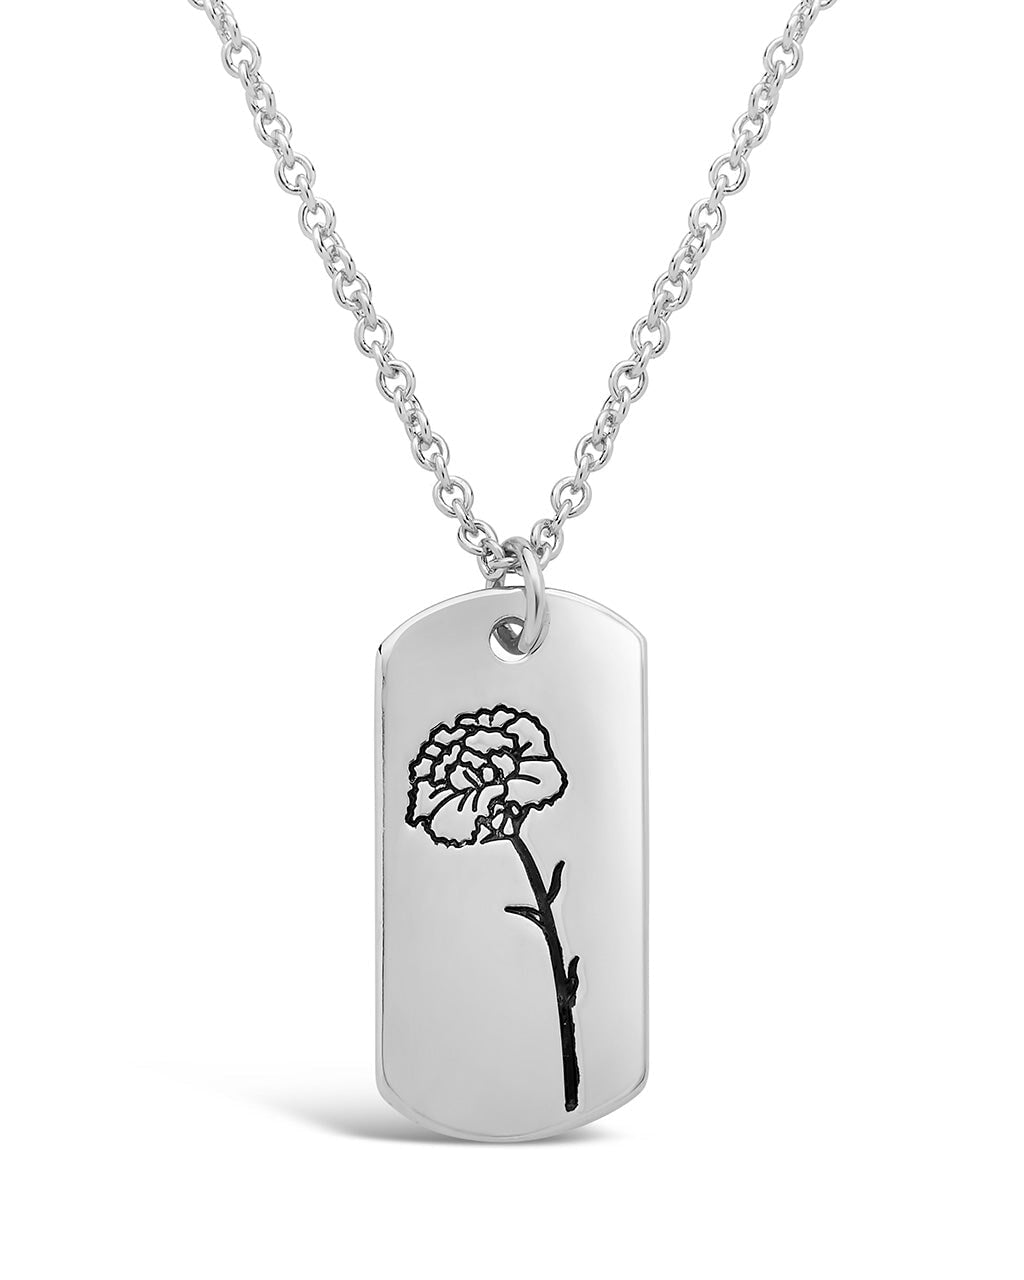 Birth Flower Pendant Necklace Sterling Forever Silver January / Carnation 